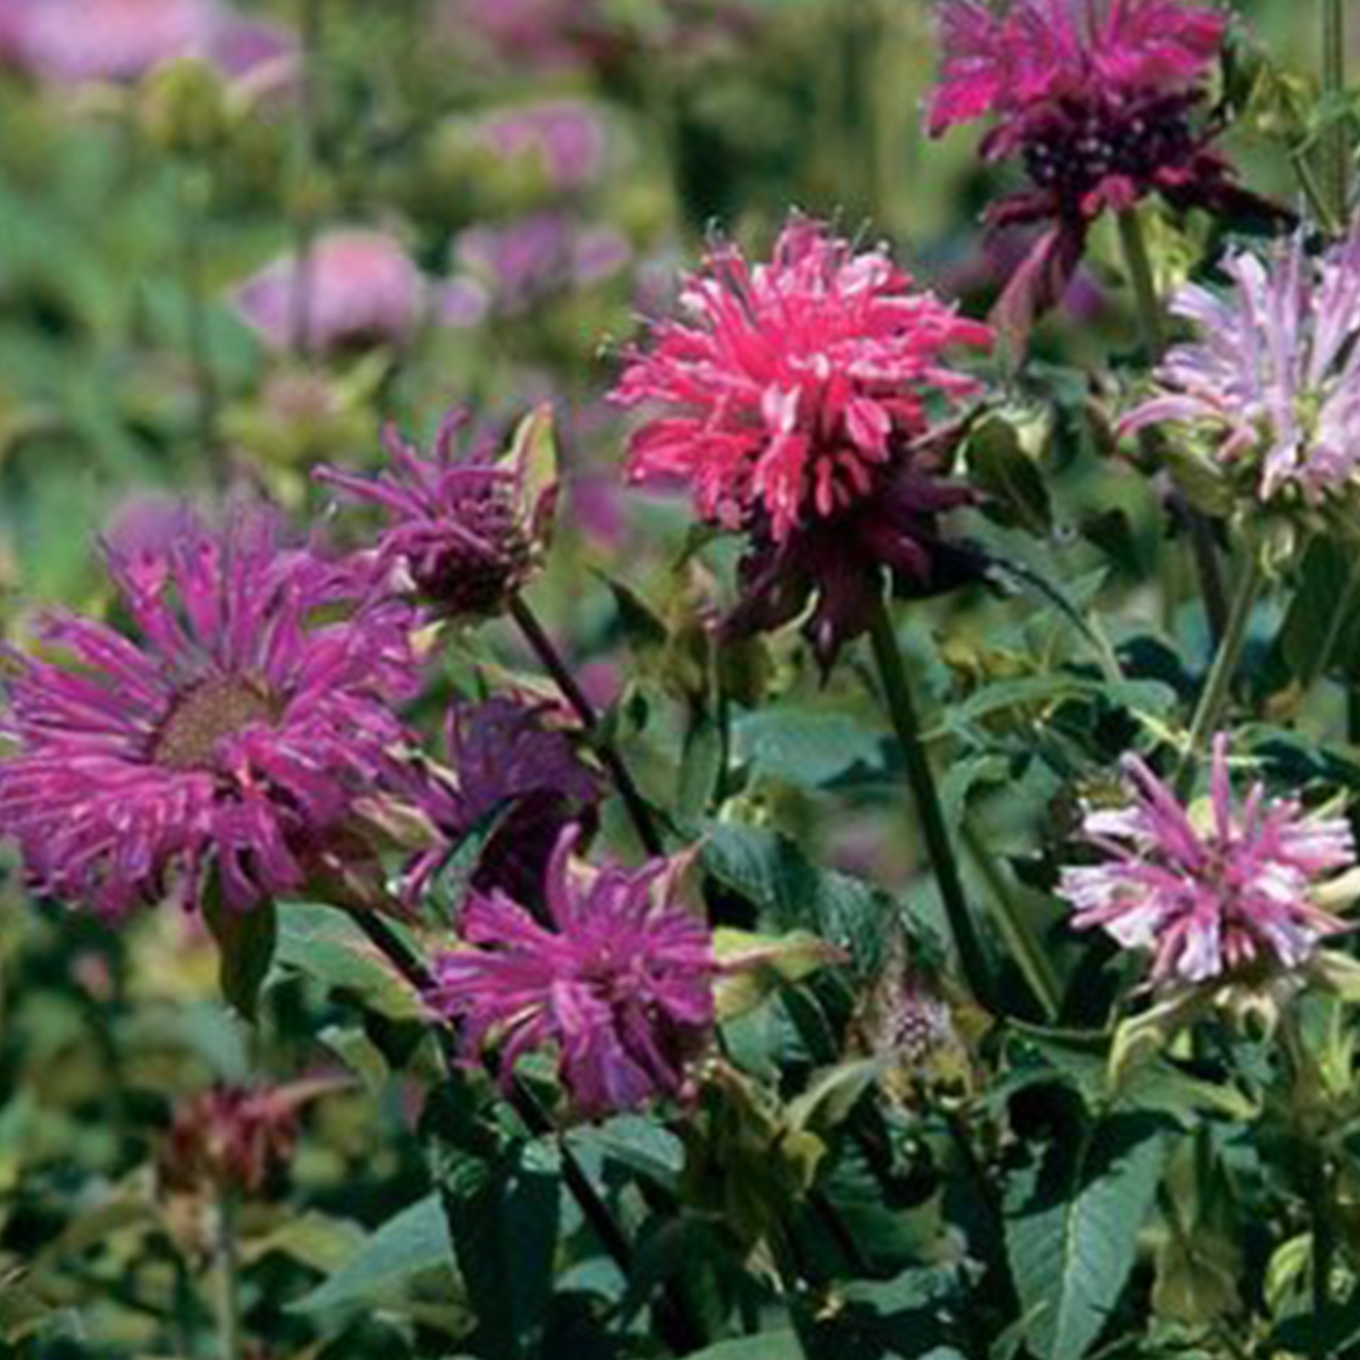 Monarda Bee Balm blooming in colors of pink and purple, close-up.